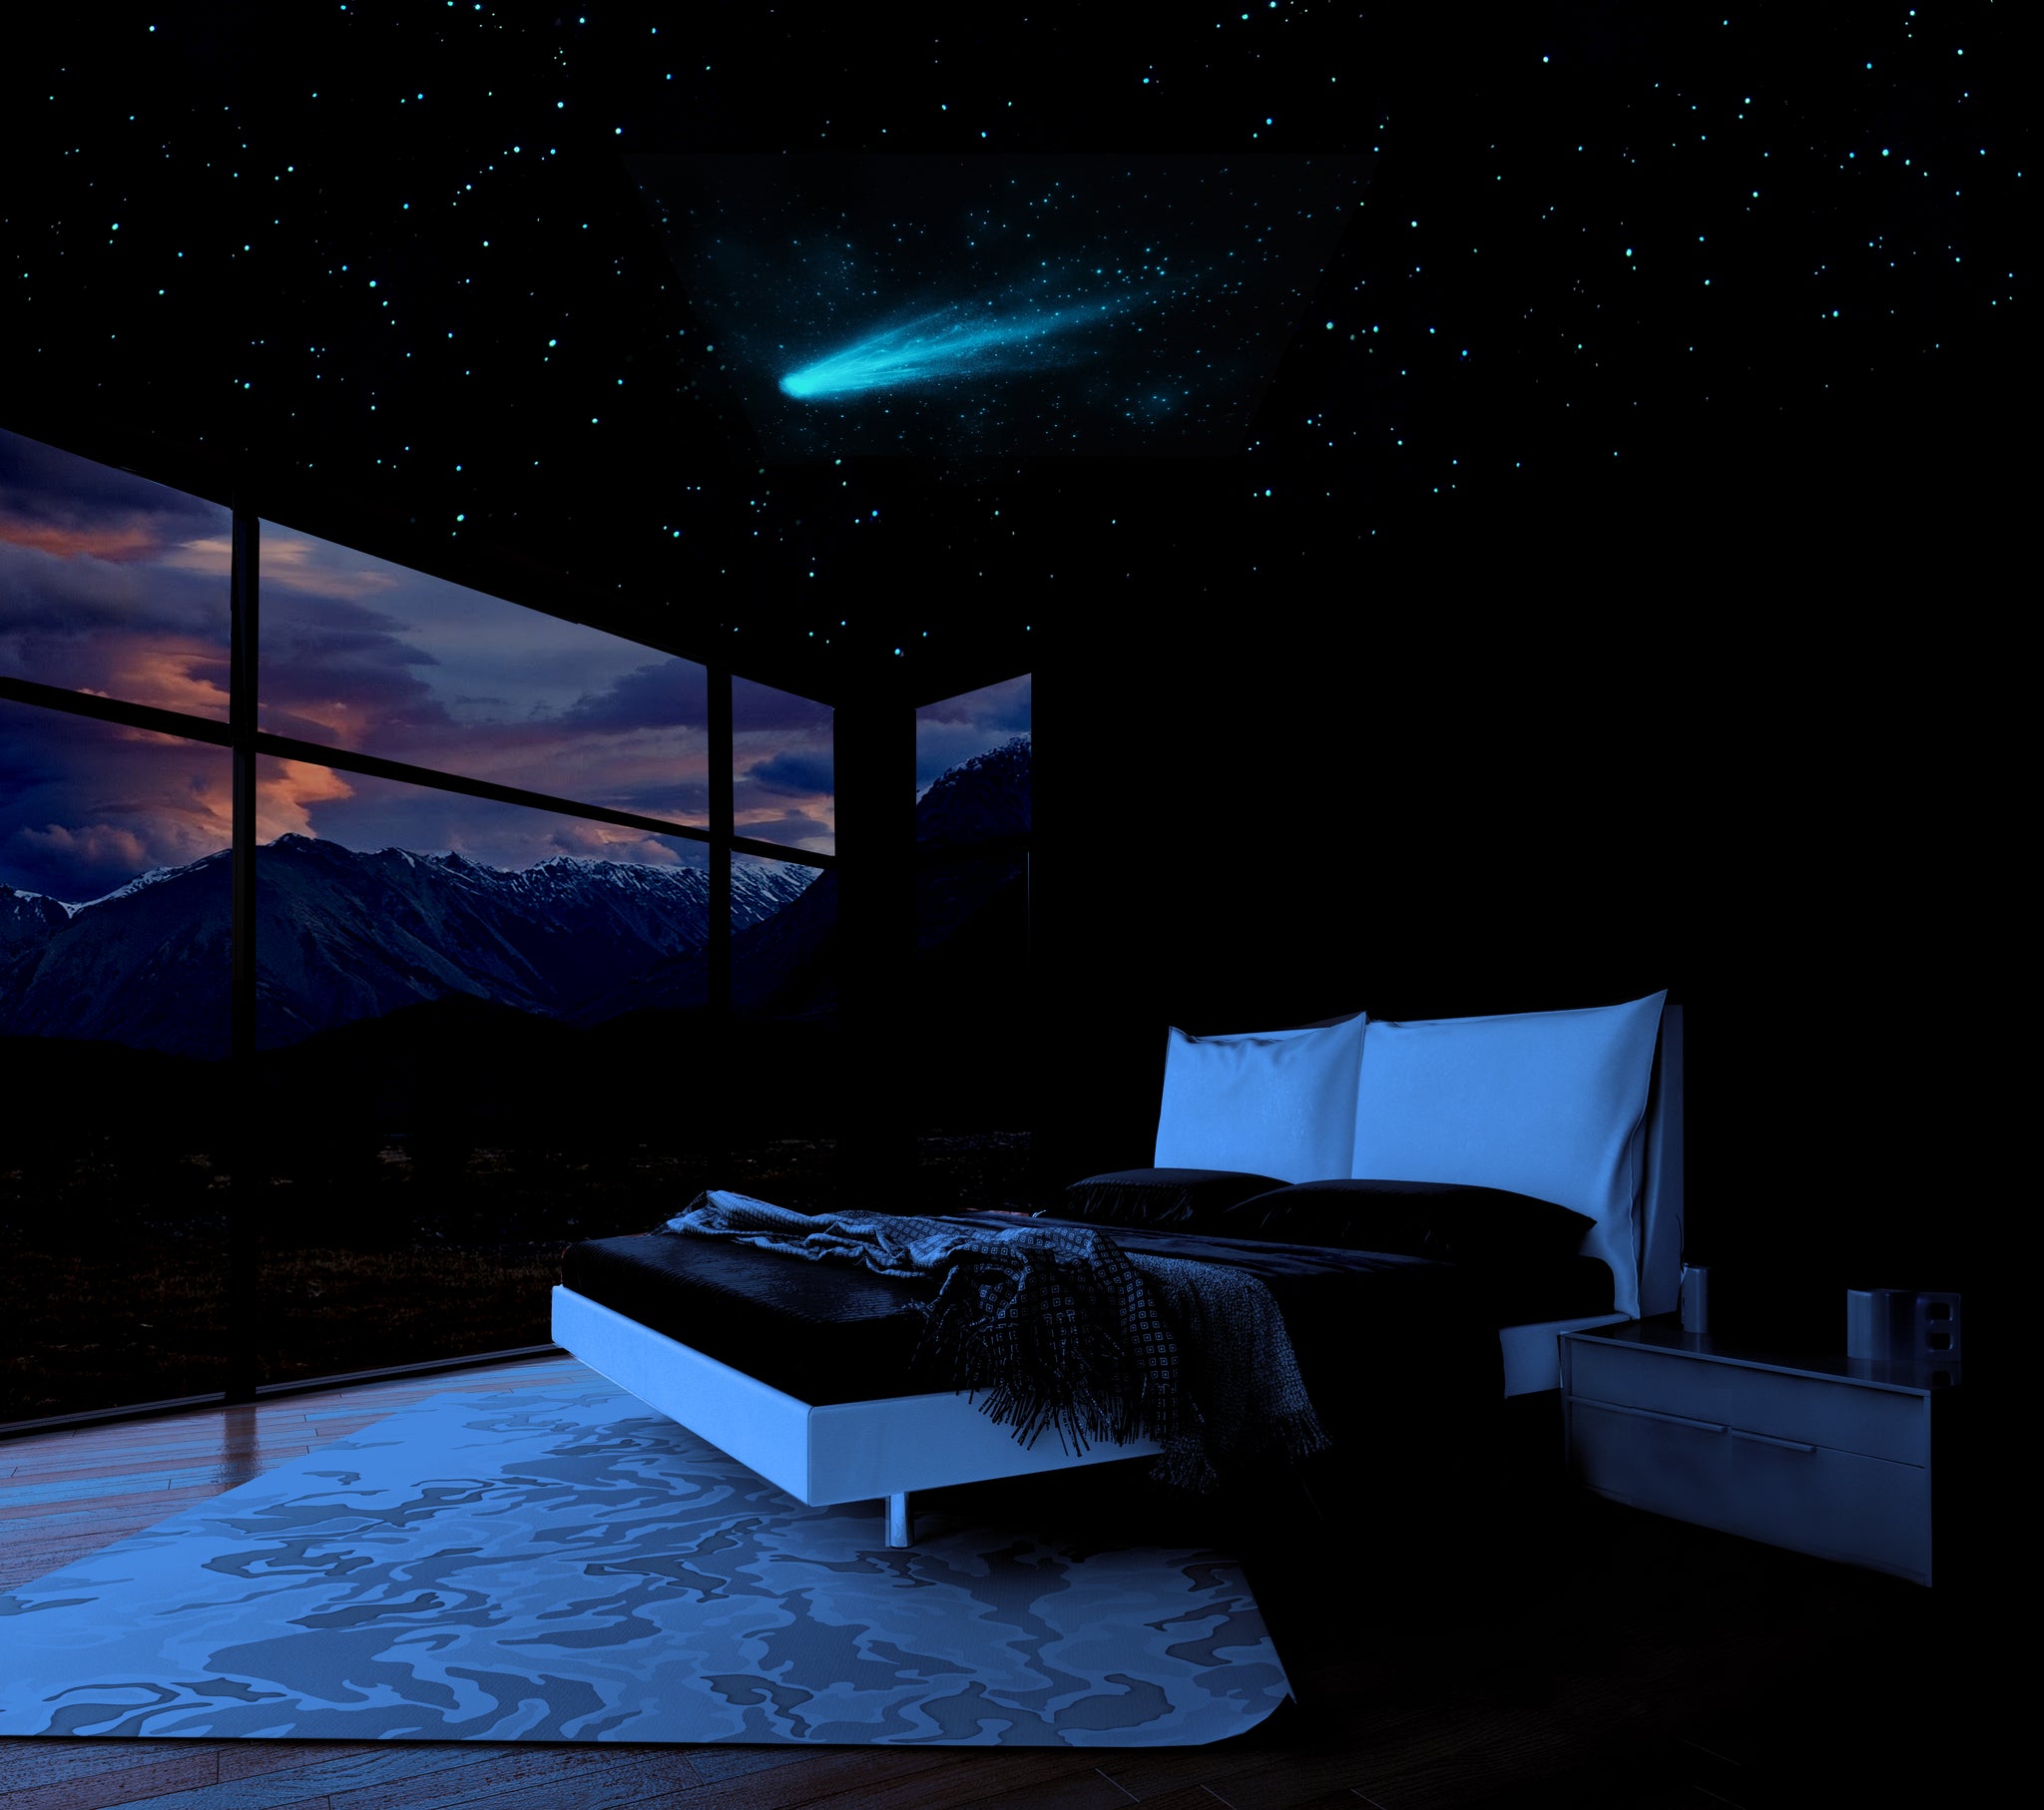 Glow in the dark star ceiling with glowing comet decal and realistic glow stickers on a bedroom ceiling. Comet and stars are luminescent on the ceiling over the bed at night.